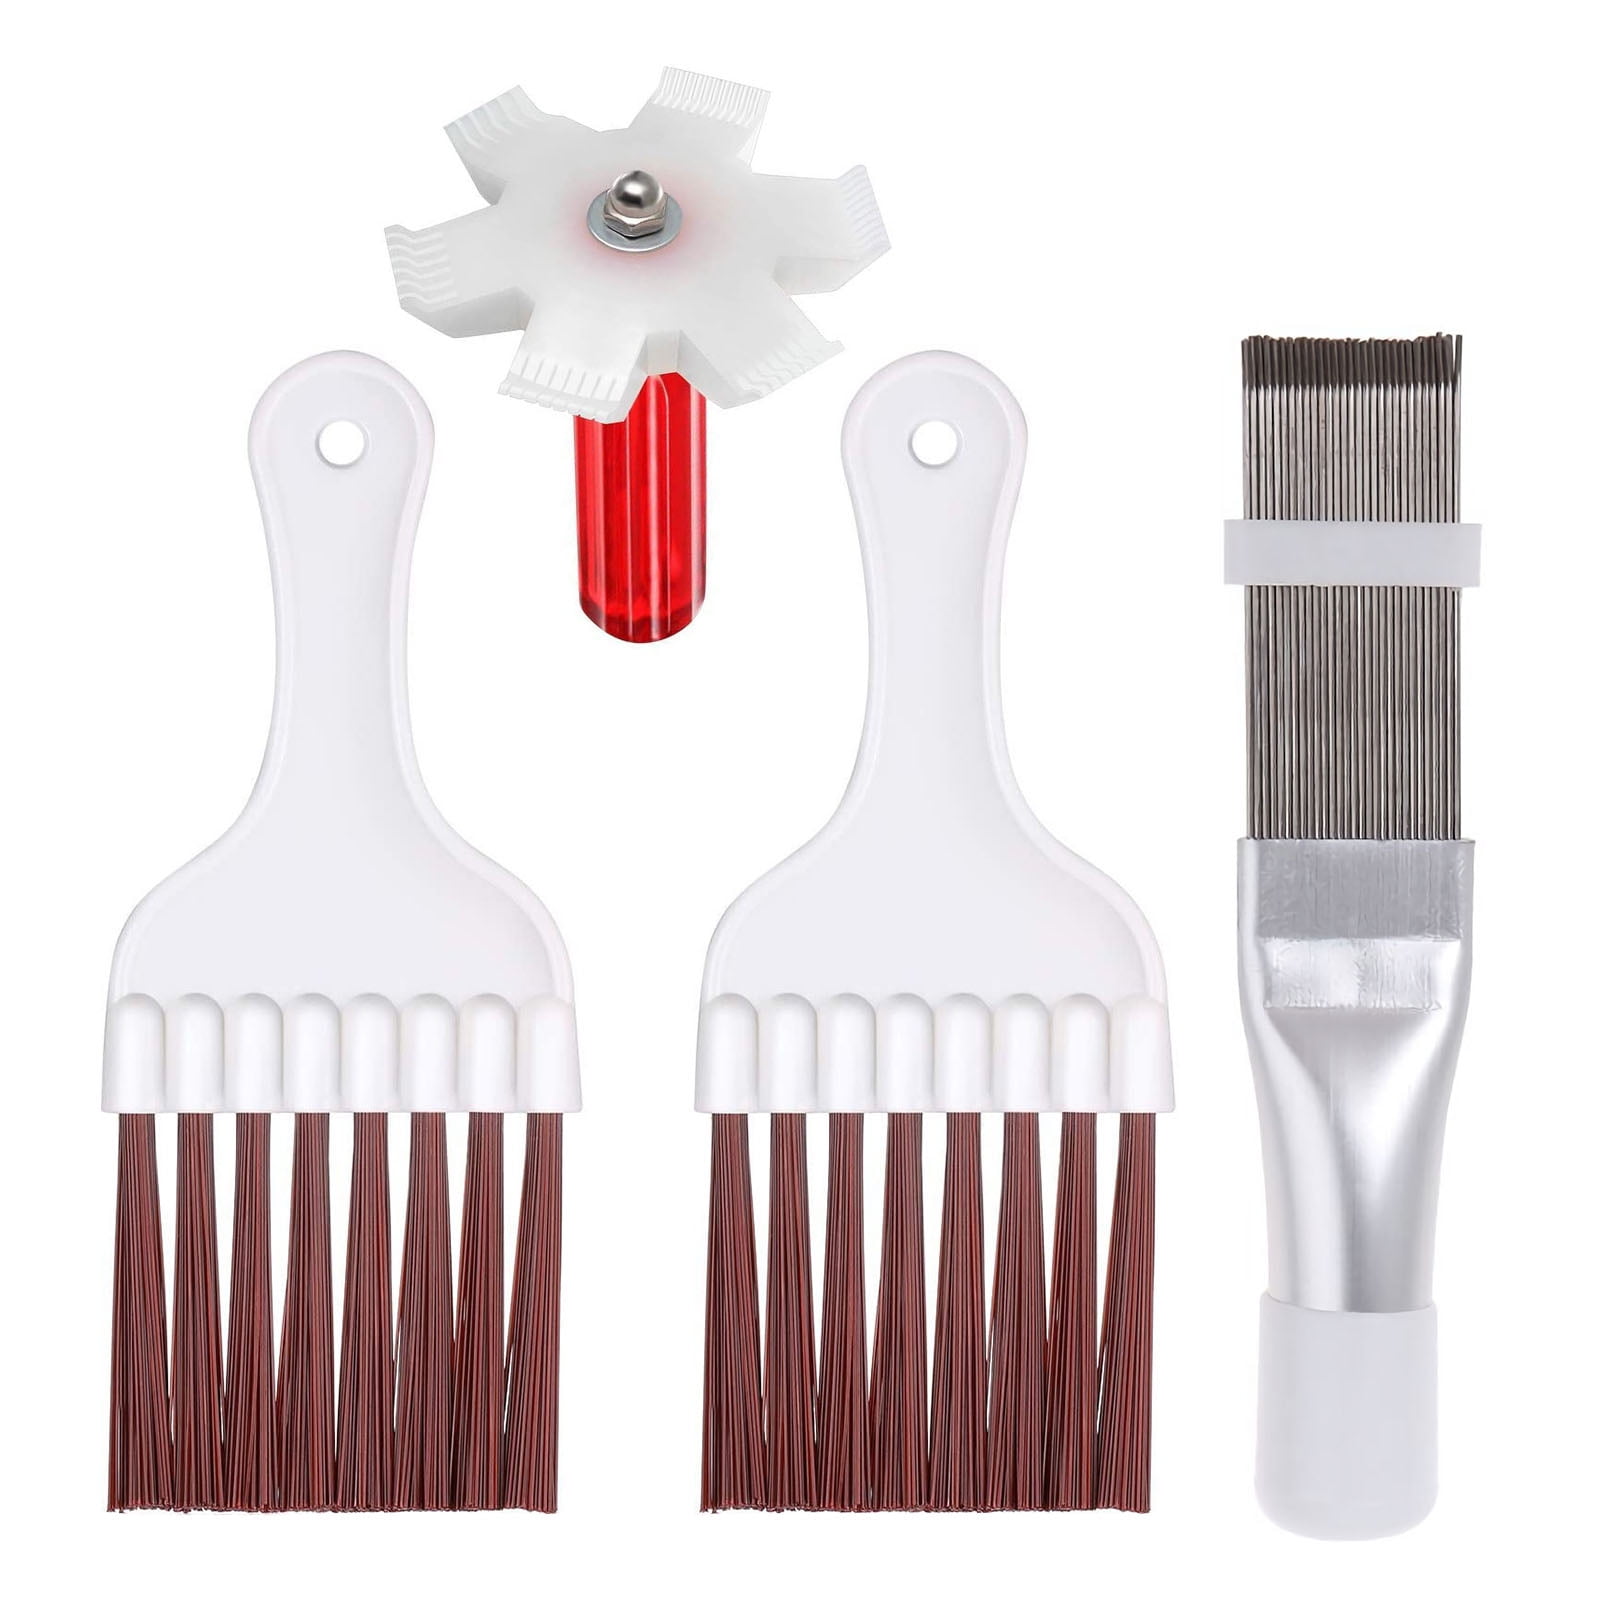 CHILDWEET 1 Set Condenser Cleaning Brush Cleaning Tool Radiator Brush Small  Whisk Brush fin Whisk Brush Hairbrush Cleaner air Conditioner Coil Cleaner